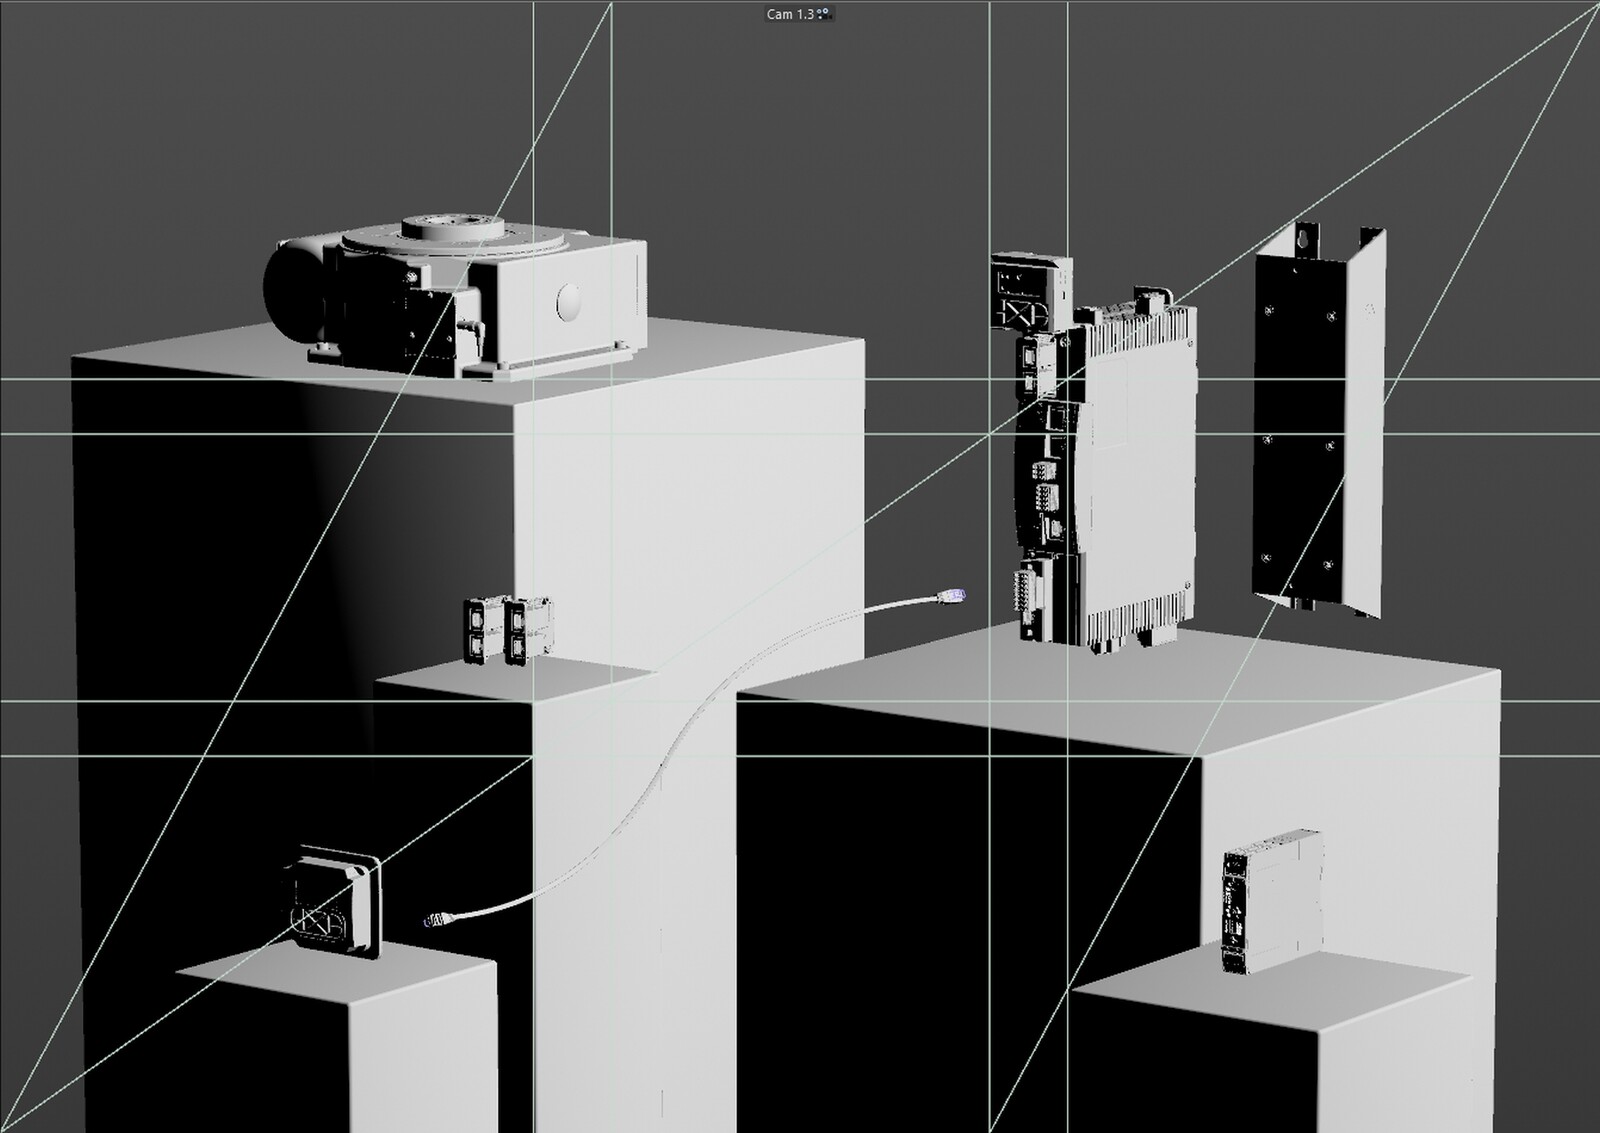 Cinema 4D Viewport for the composition.